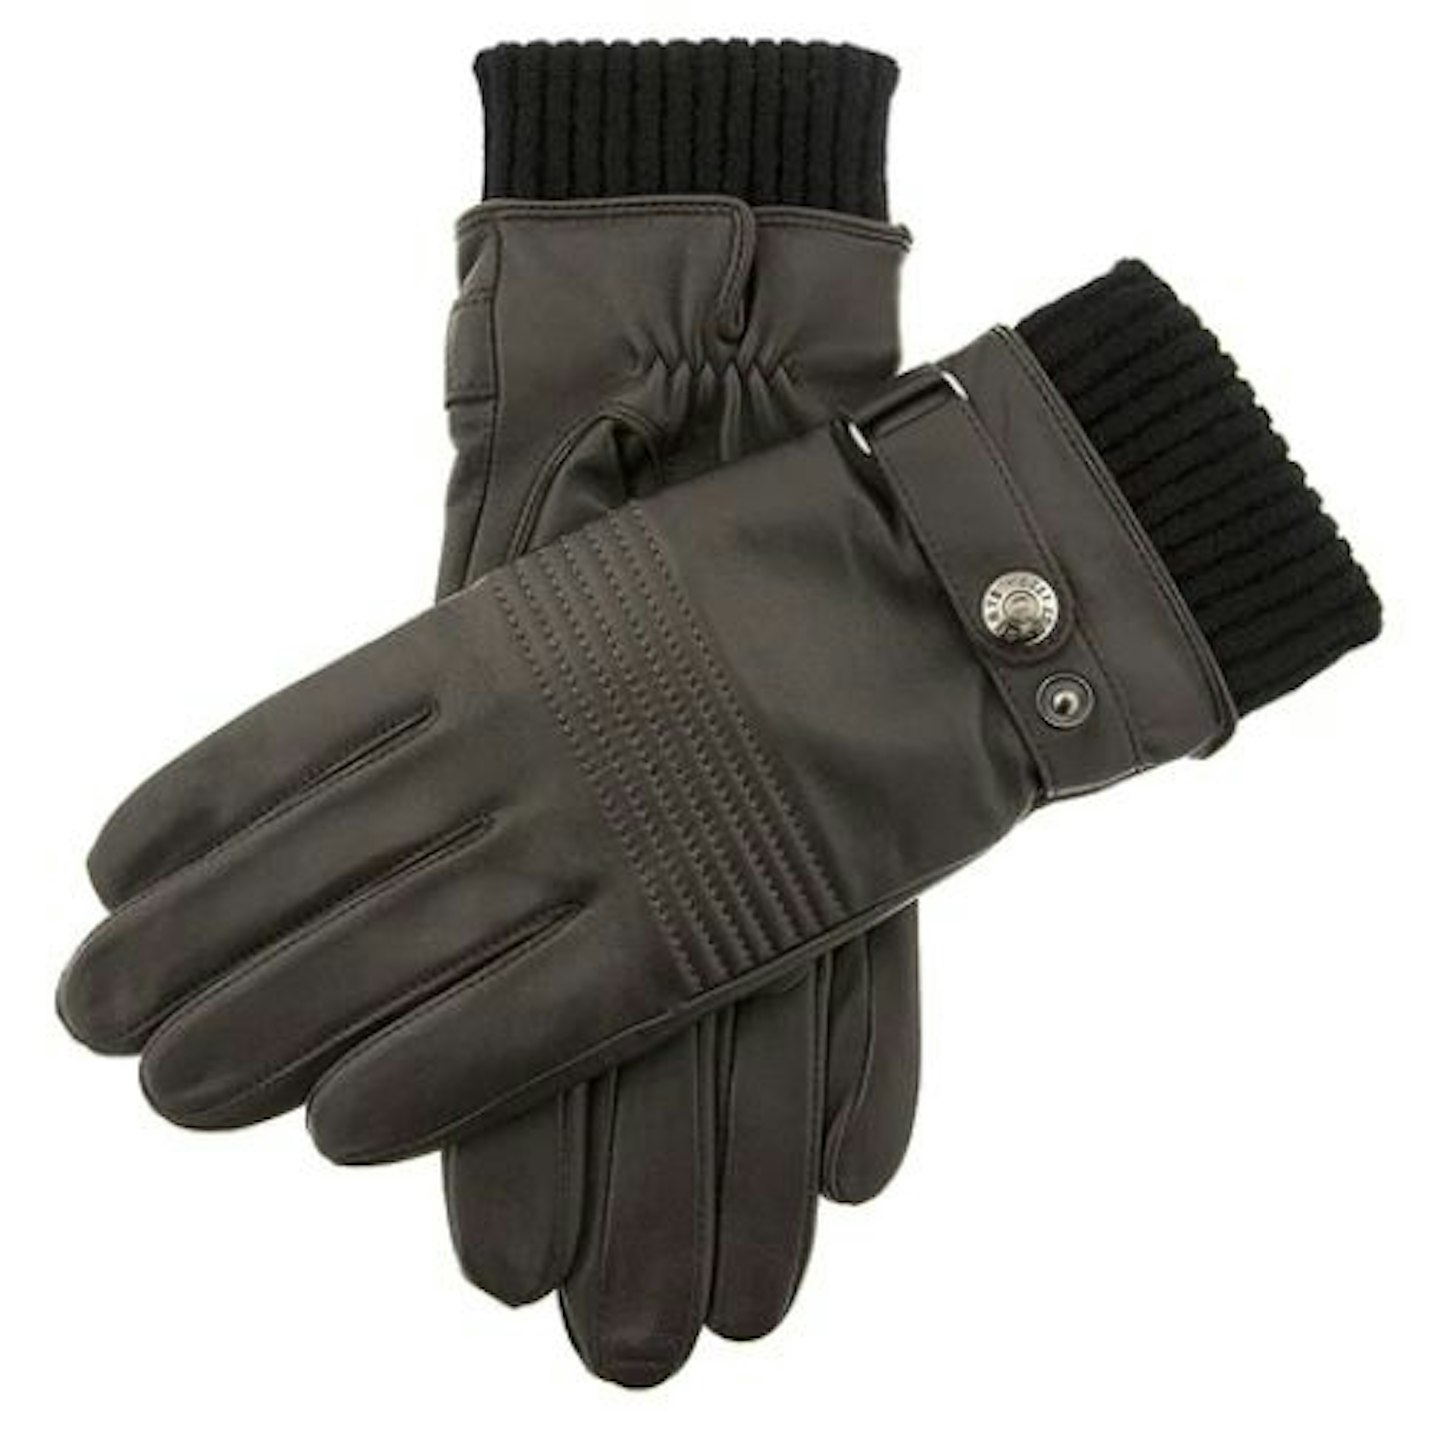 Men's Water-Resistant Leather Gloves with Stitch Detail